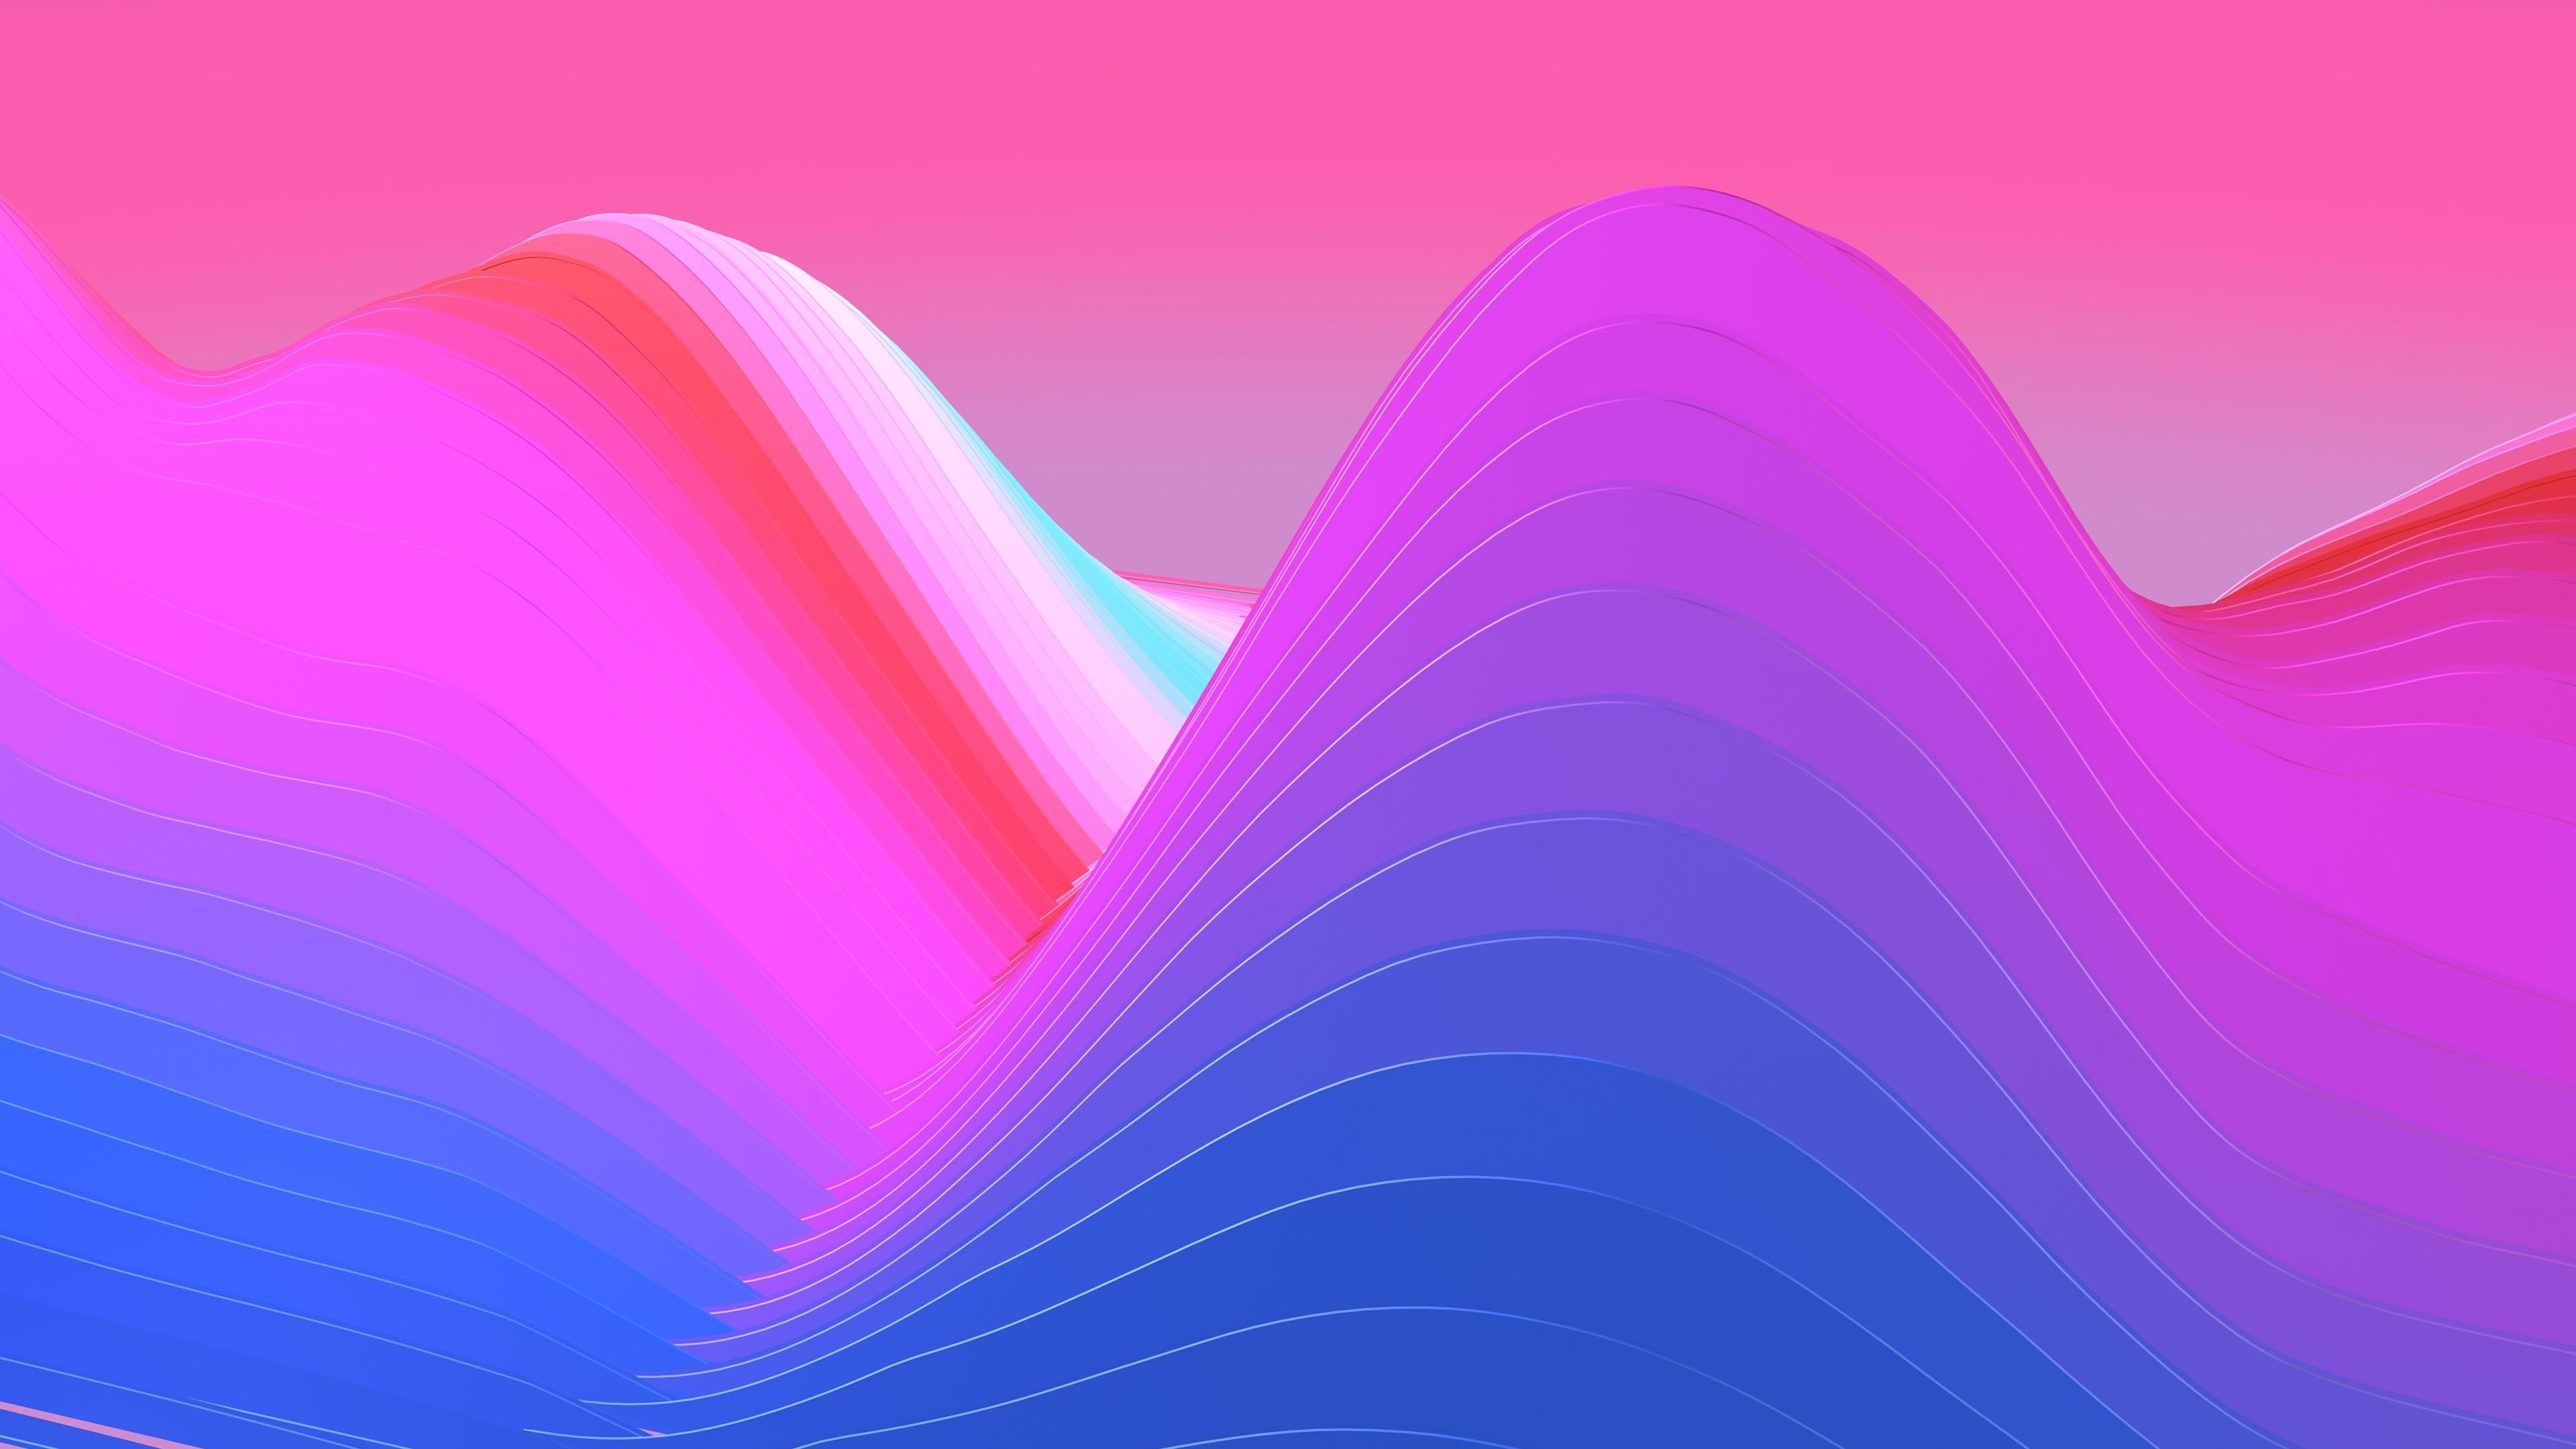 Download 3840x2160 Neon Waves, Pink And Purple, Mountain Wallpaper for UHD TV